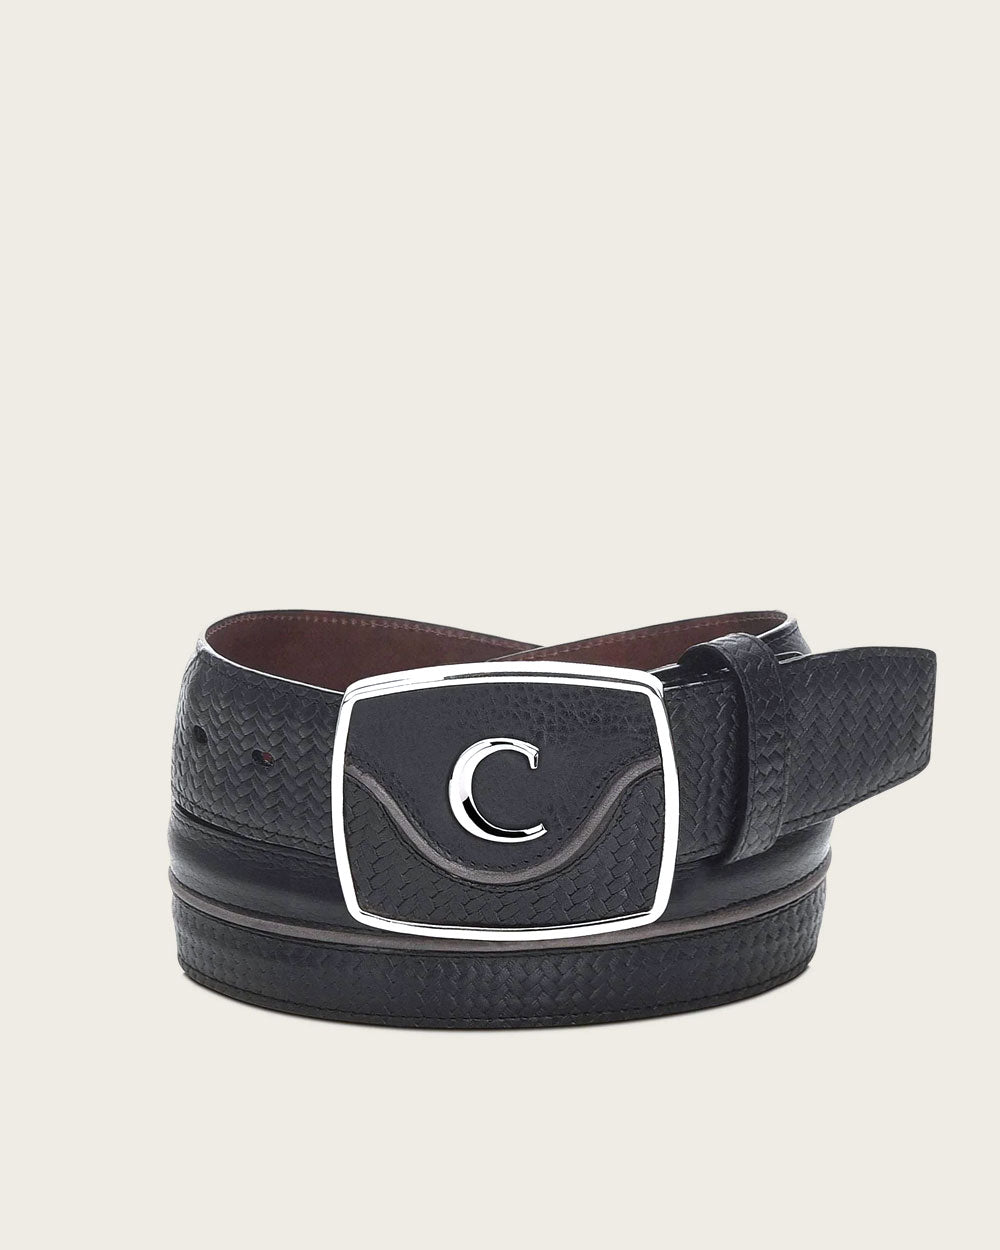 Black Leather Western Belt: Cuadra's engraved belt adds elegance to any outfit with premium materials and craftsmanship.